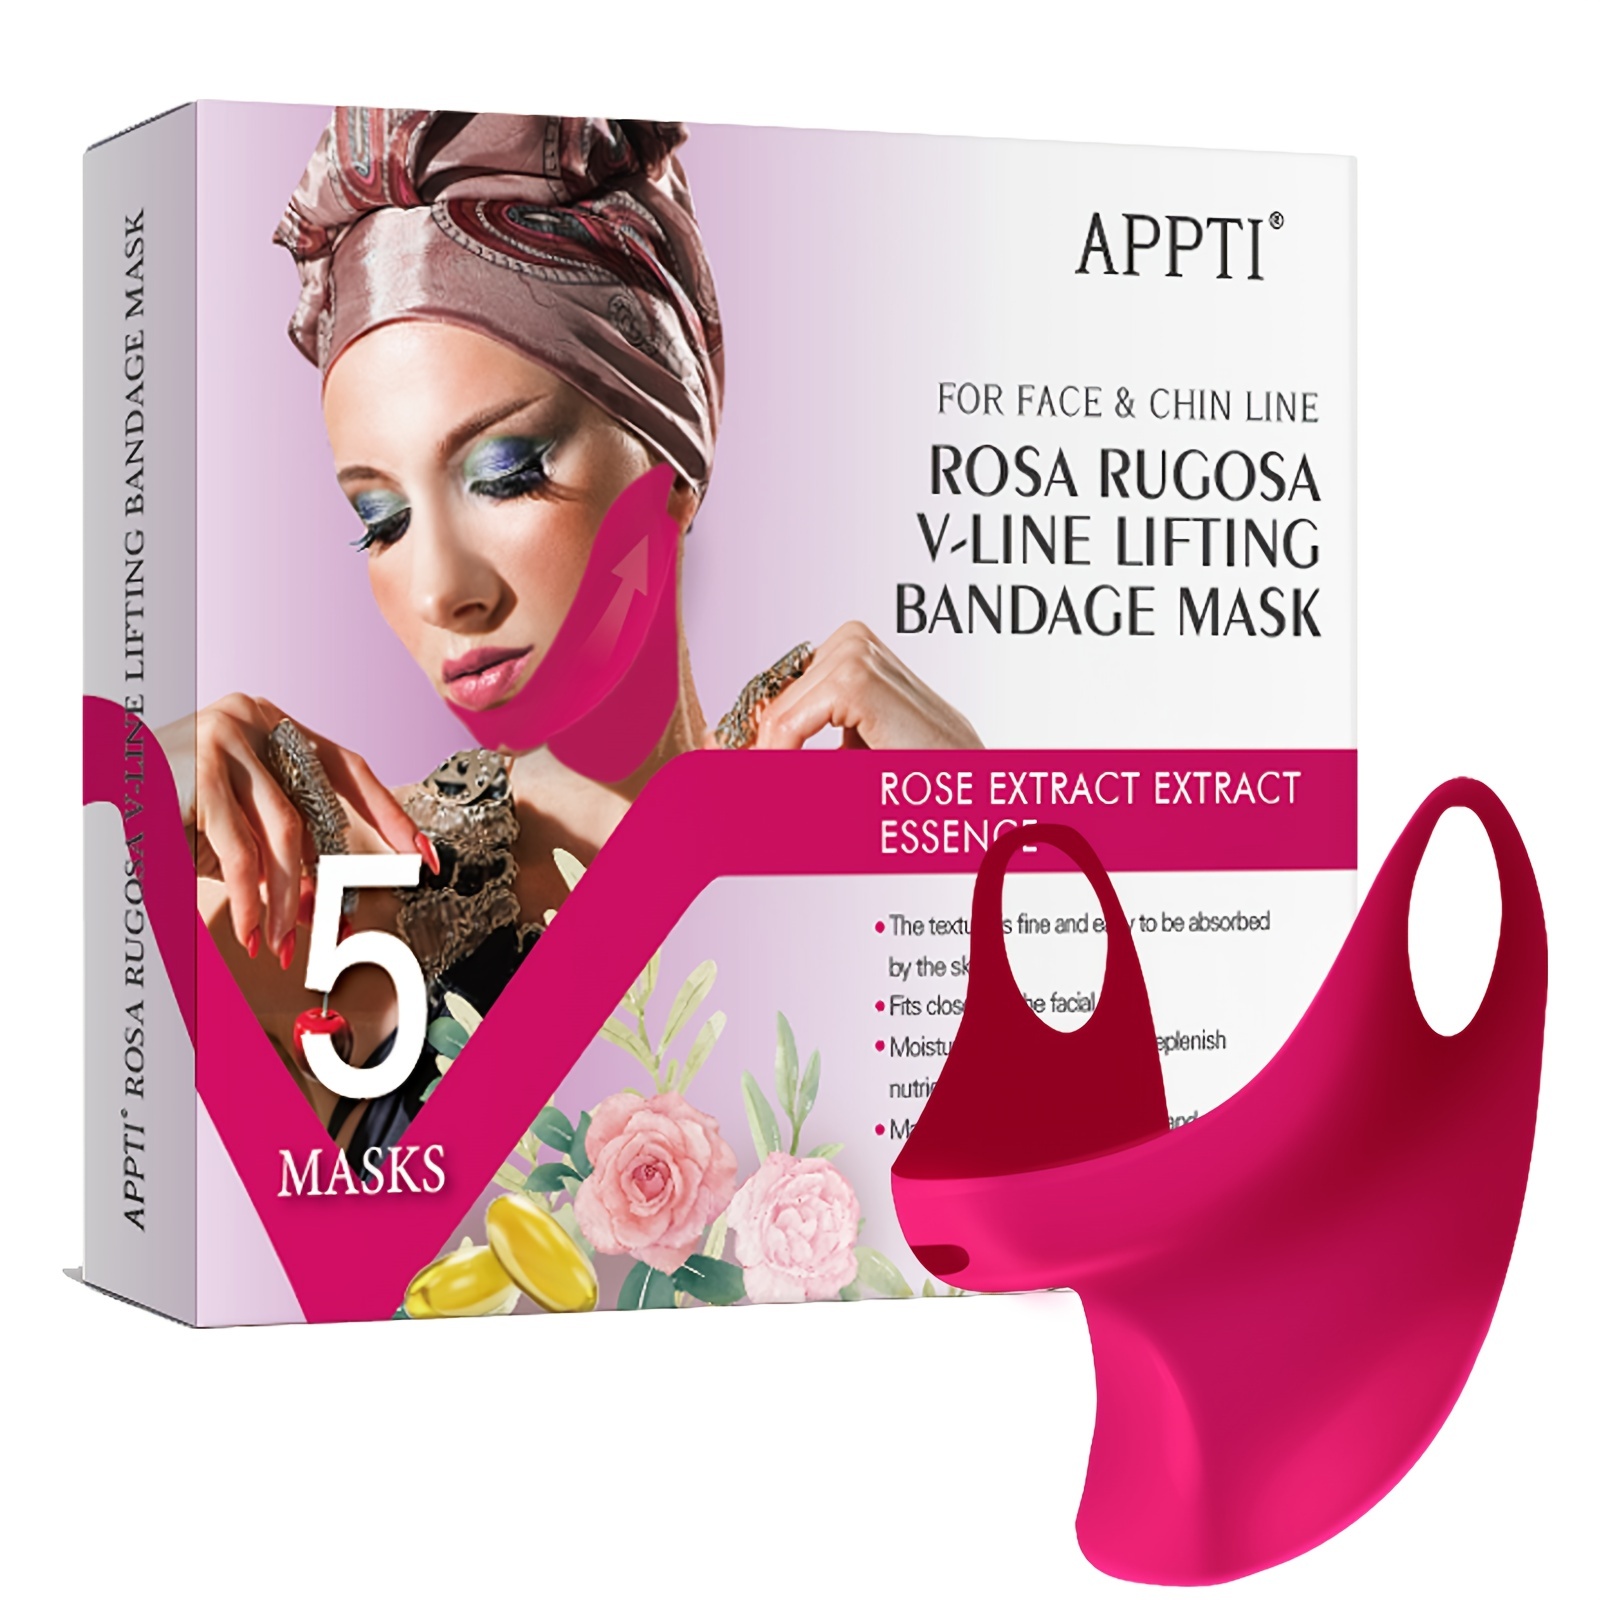 Double Chin Reducer V Line Face Lifting Tape Face Strap, Soft Chin Strap  Face Shaper To Tighten Double Chin For Women And Men